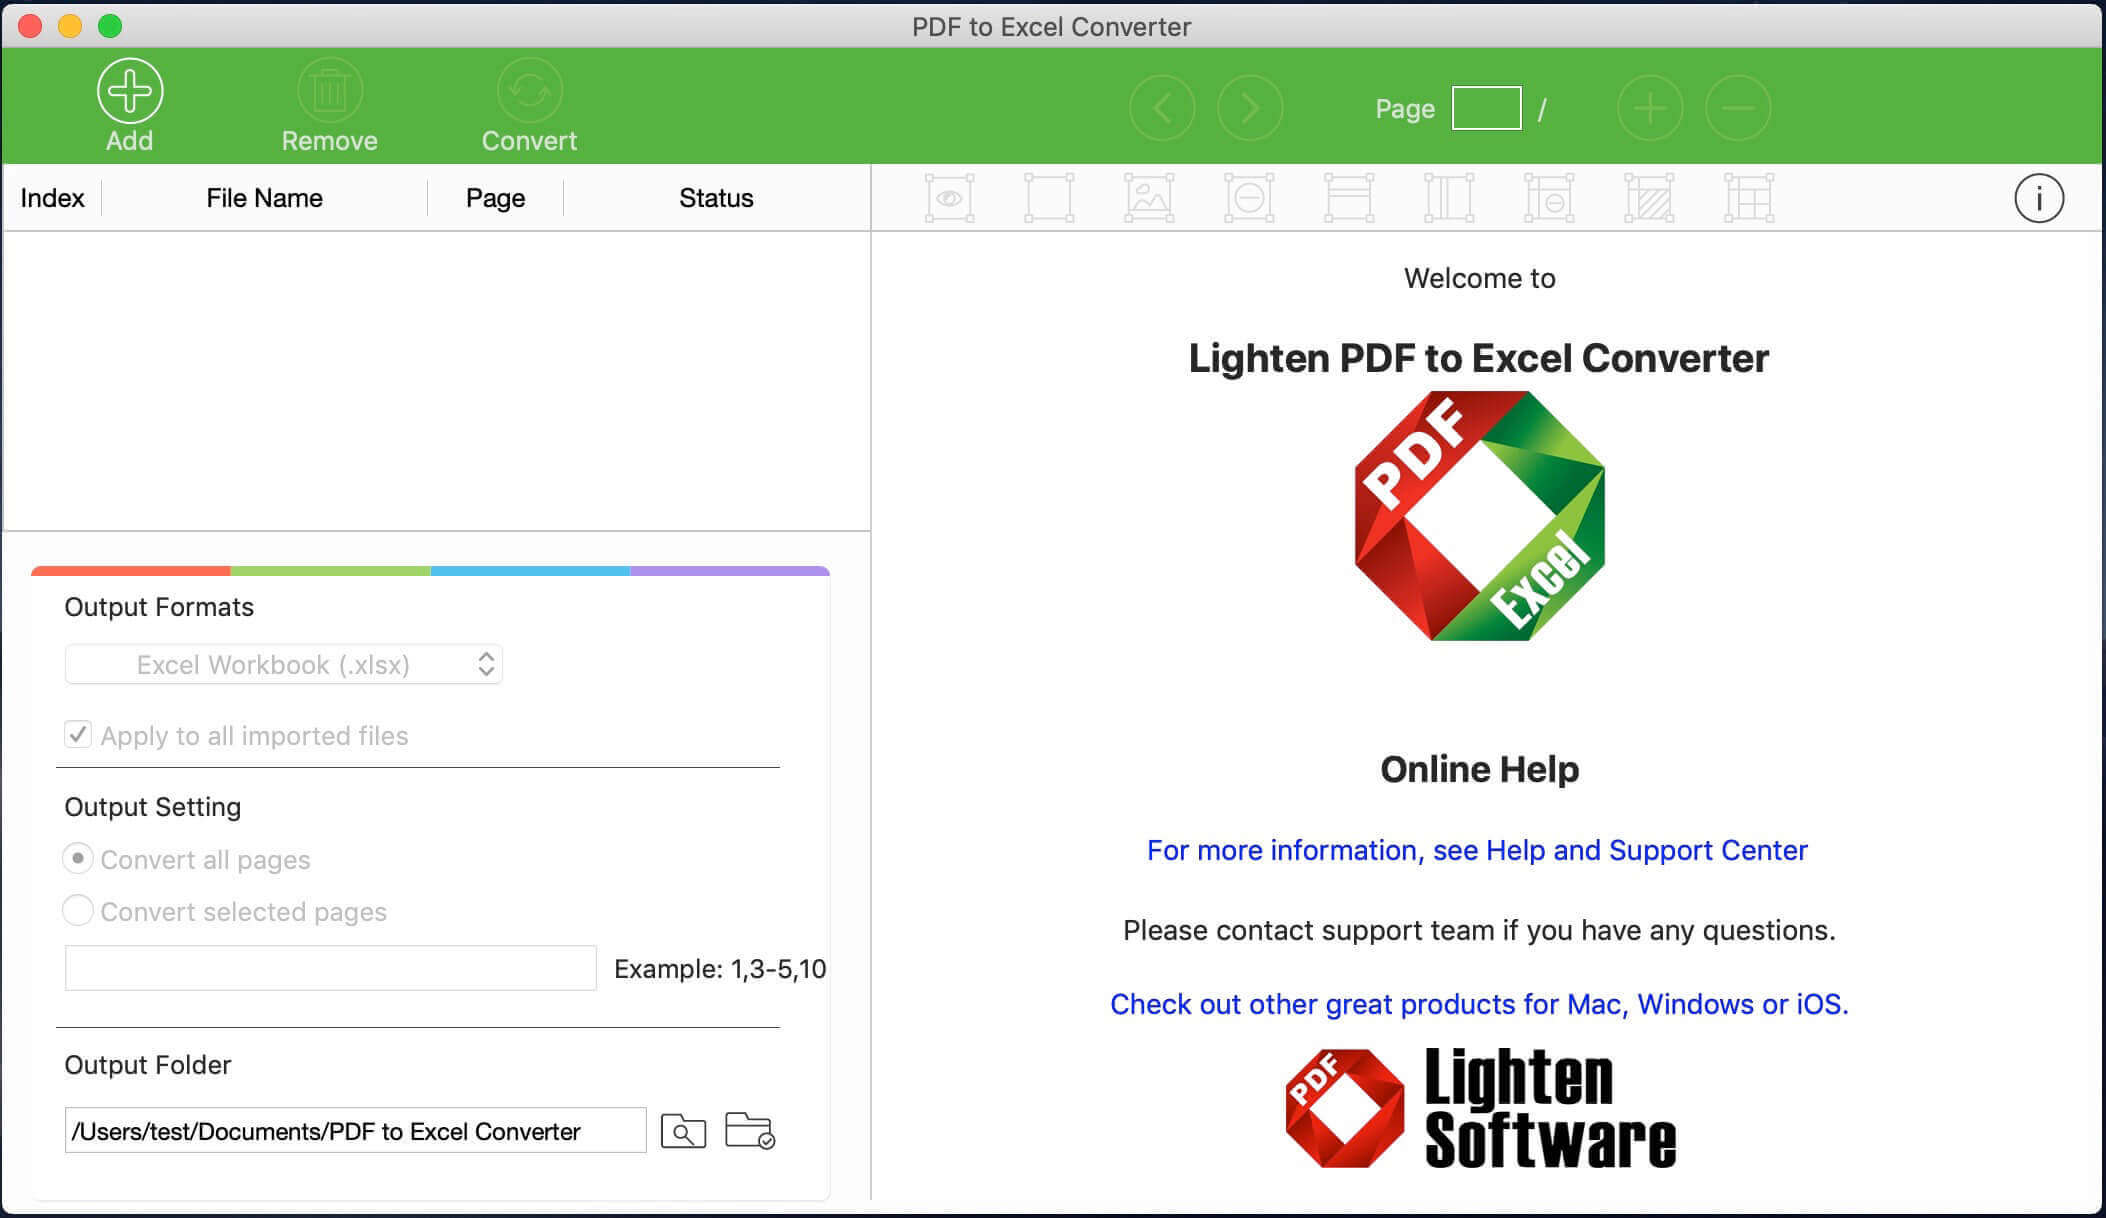 free download pdf to excel converter software for windows 7